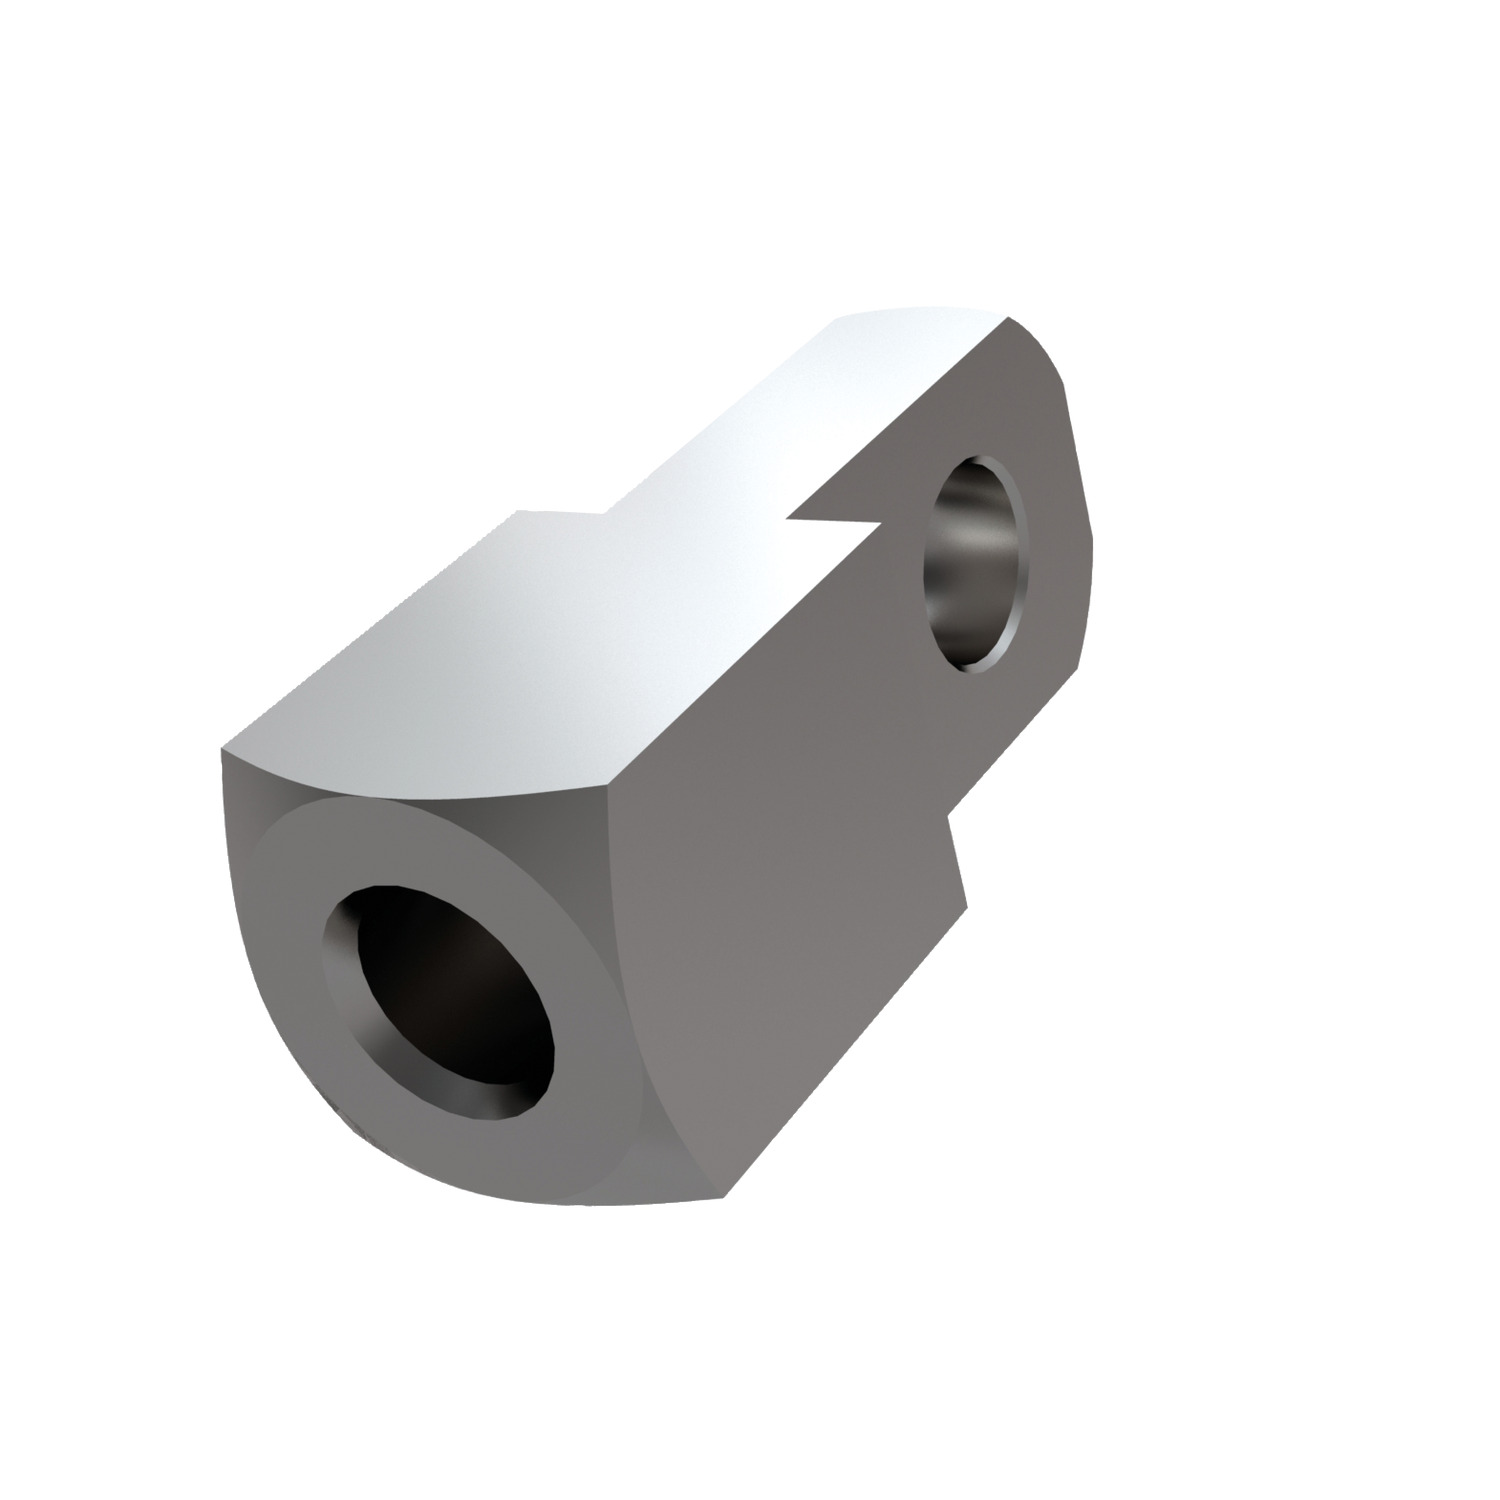 R3426 Stainless Mating Piece for Clevis Joints